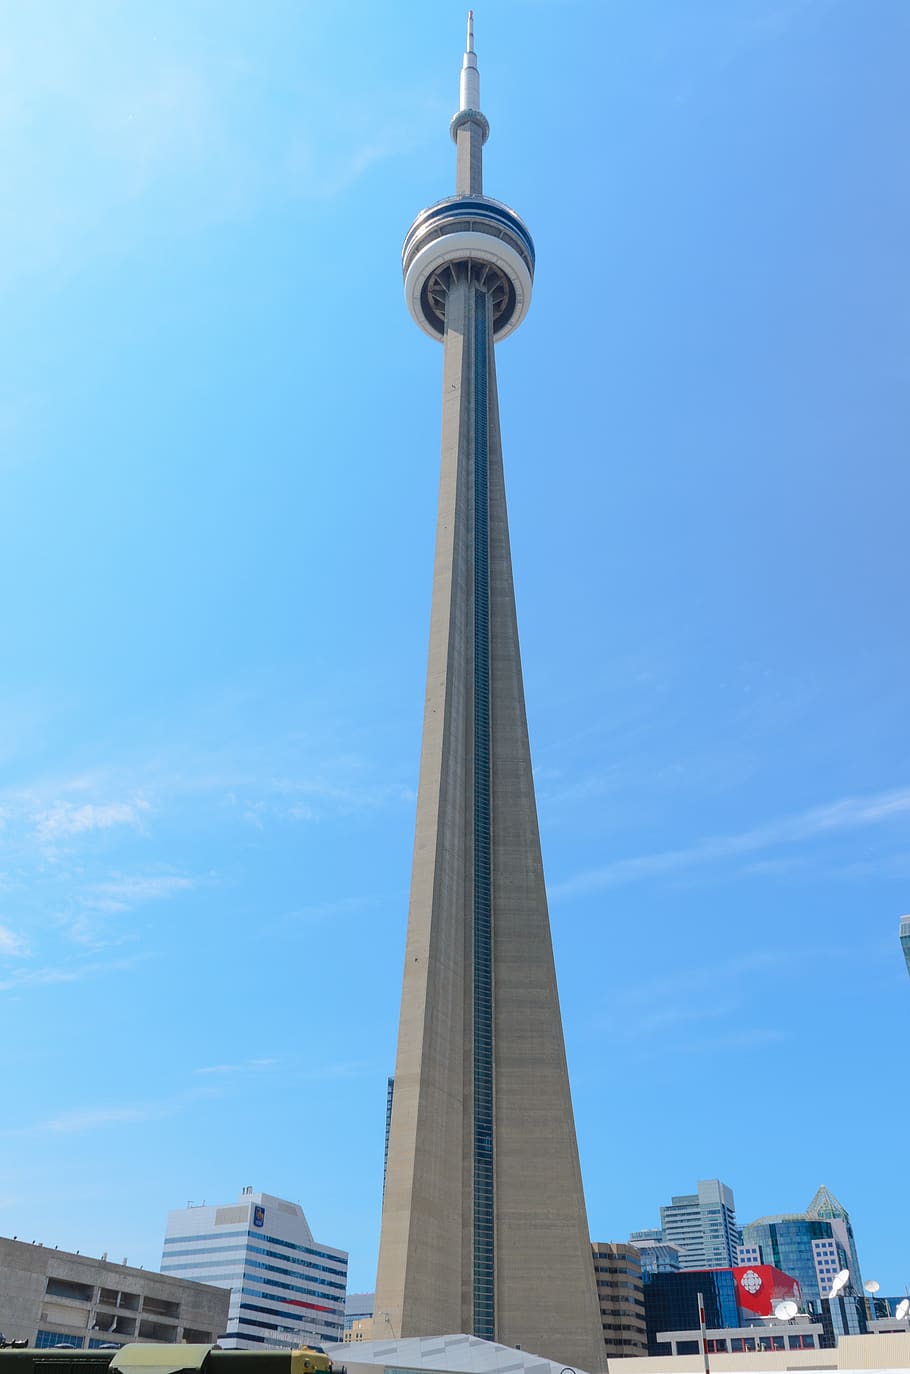 Gray Concrete Tower, architecture, blue sky, building, cn tower